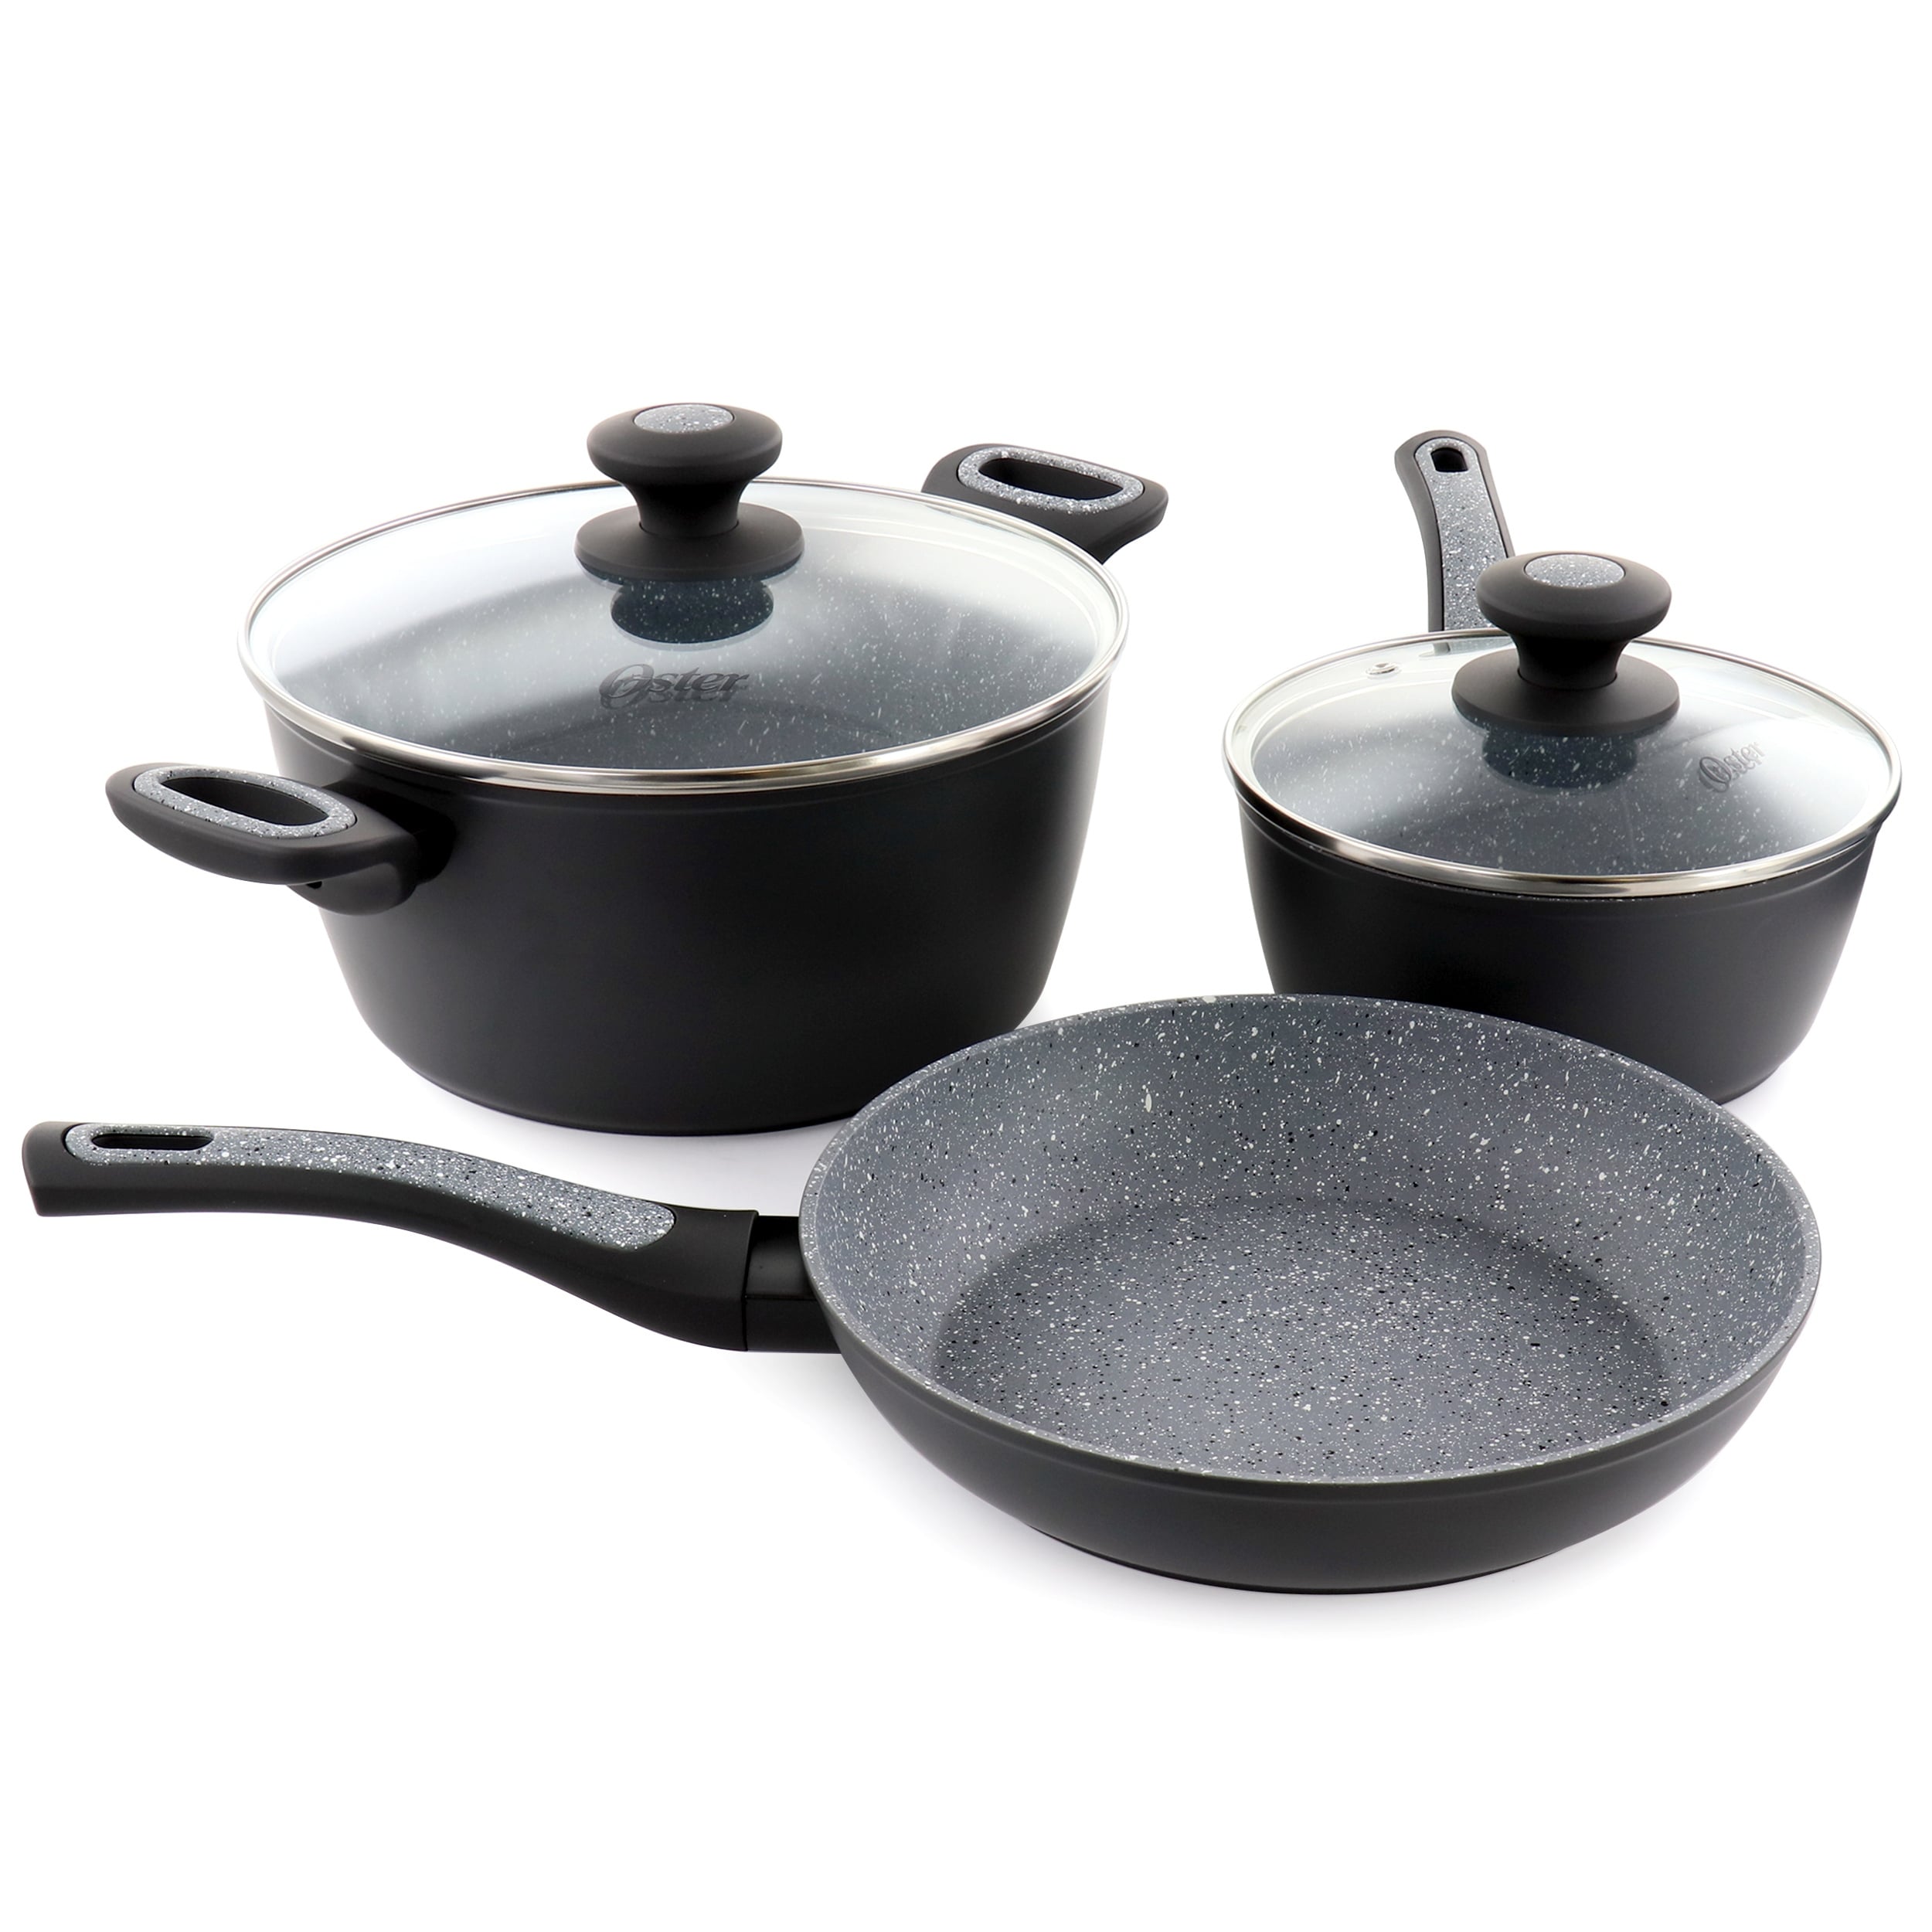 https://ak1.ostkcdn.com/images/products/is/images/direct/ce2f79b94737ef8ad1da14a340e8c20d9ac11322/Oster-Bastone-23-Piece-Nonstick-Cookware-Bakeware-Set-in-Speckled-Gray.jpg